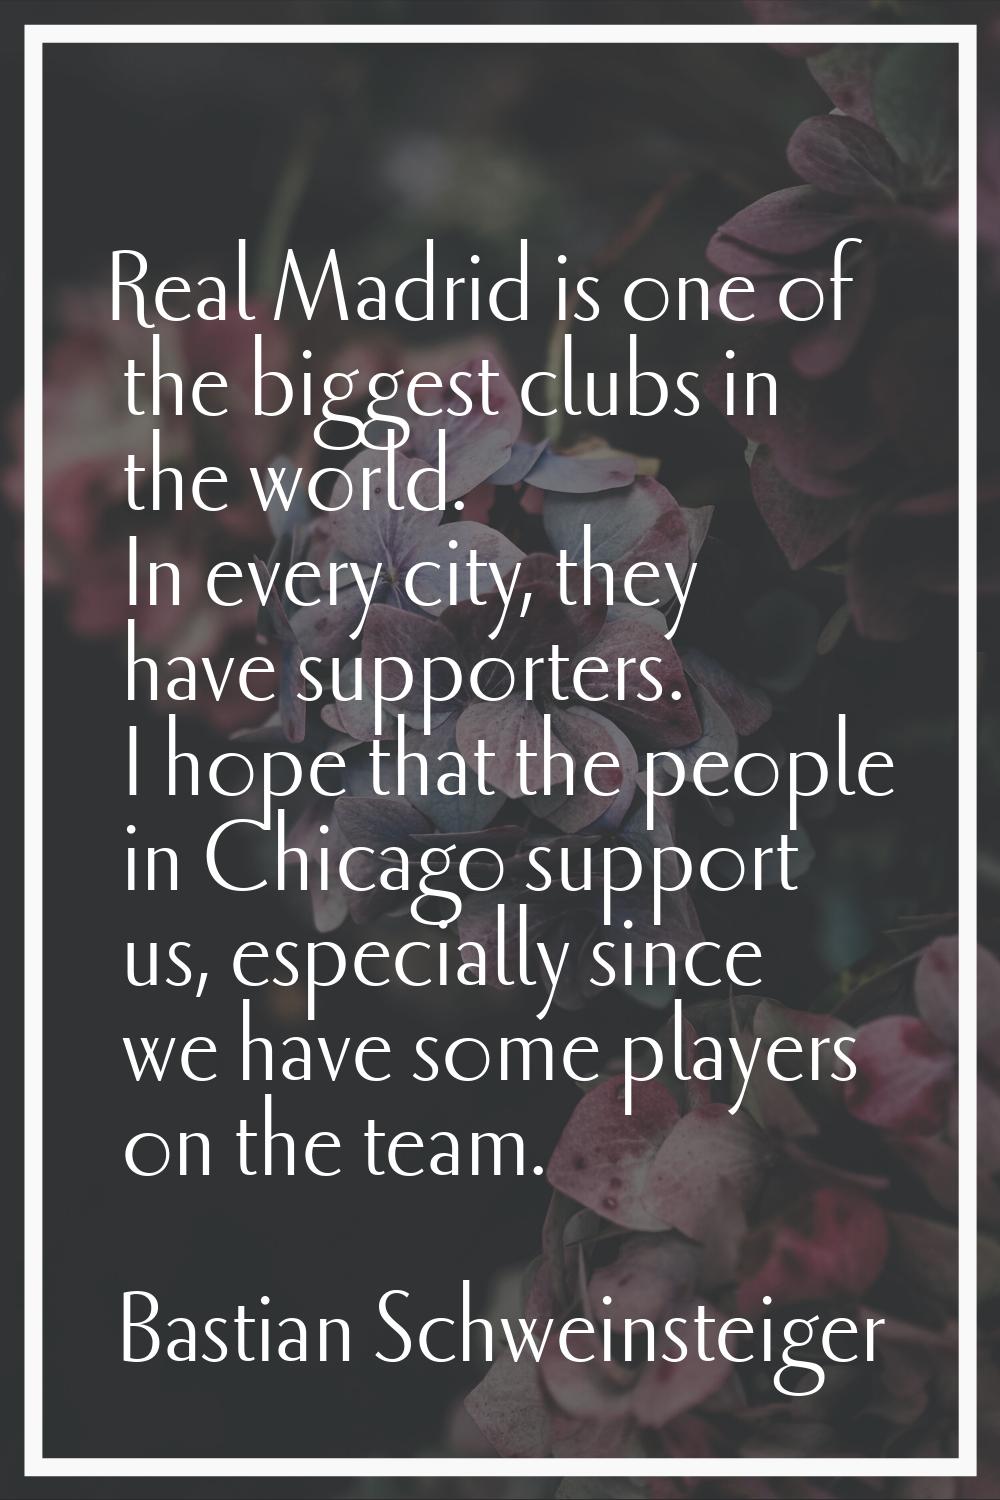 Real Madrid is one of the biggest clubs in the world. In every city, they have supporters. I hope t